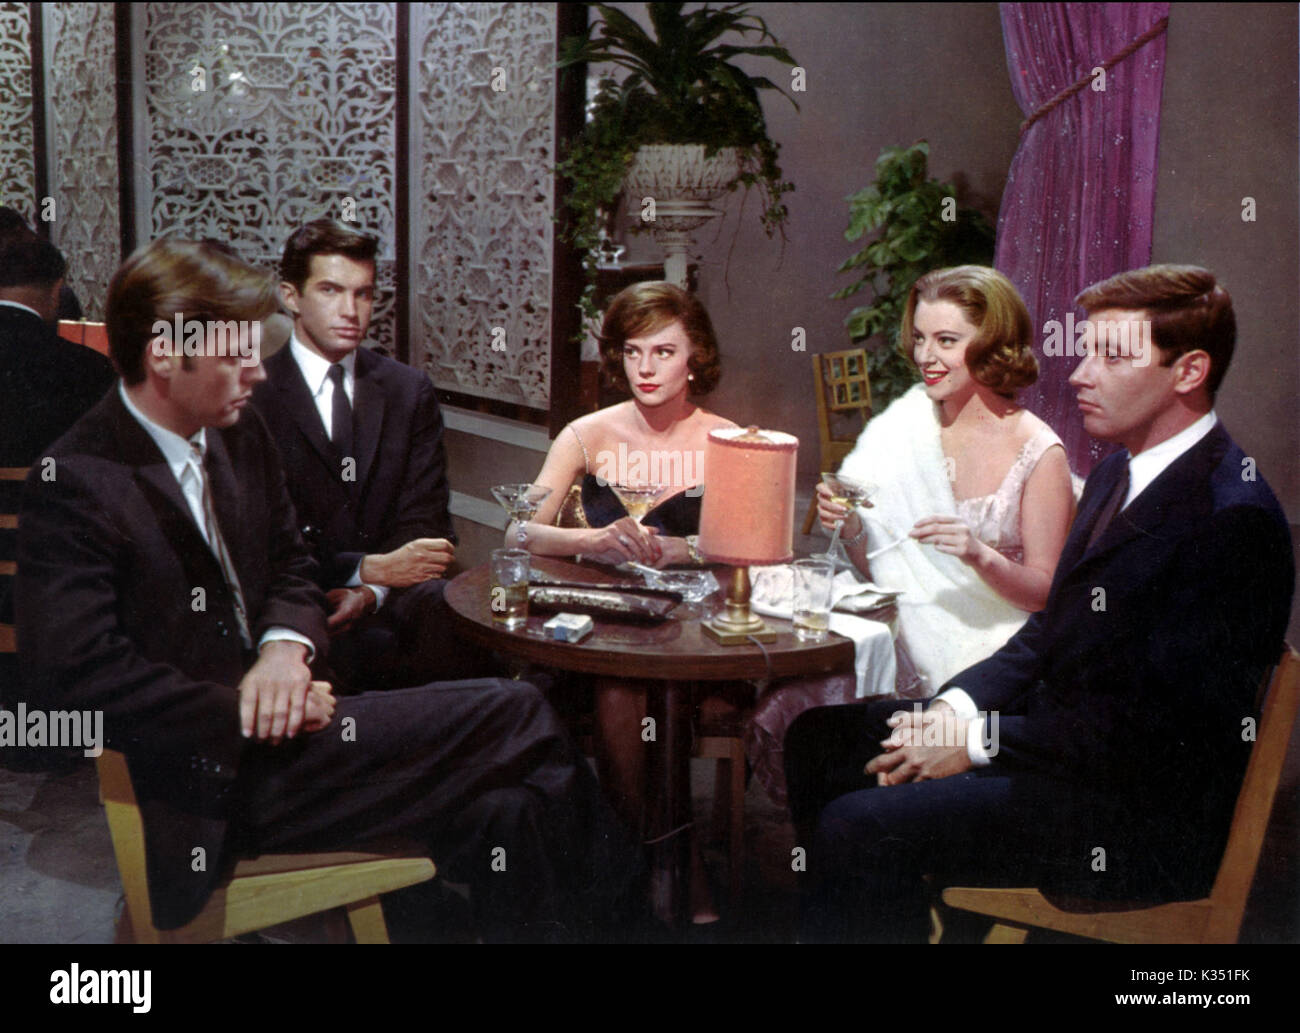 ALL THE FINE YOUNG CANNIBALS  ROBERT WAGNER, GEORGE HAMILTON, NATALIE WOOD, SUSAN KOHNER,      Date: 1960 Stock Photo